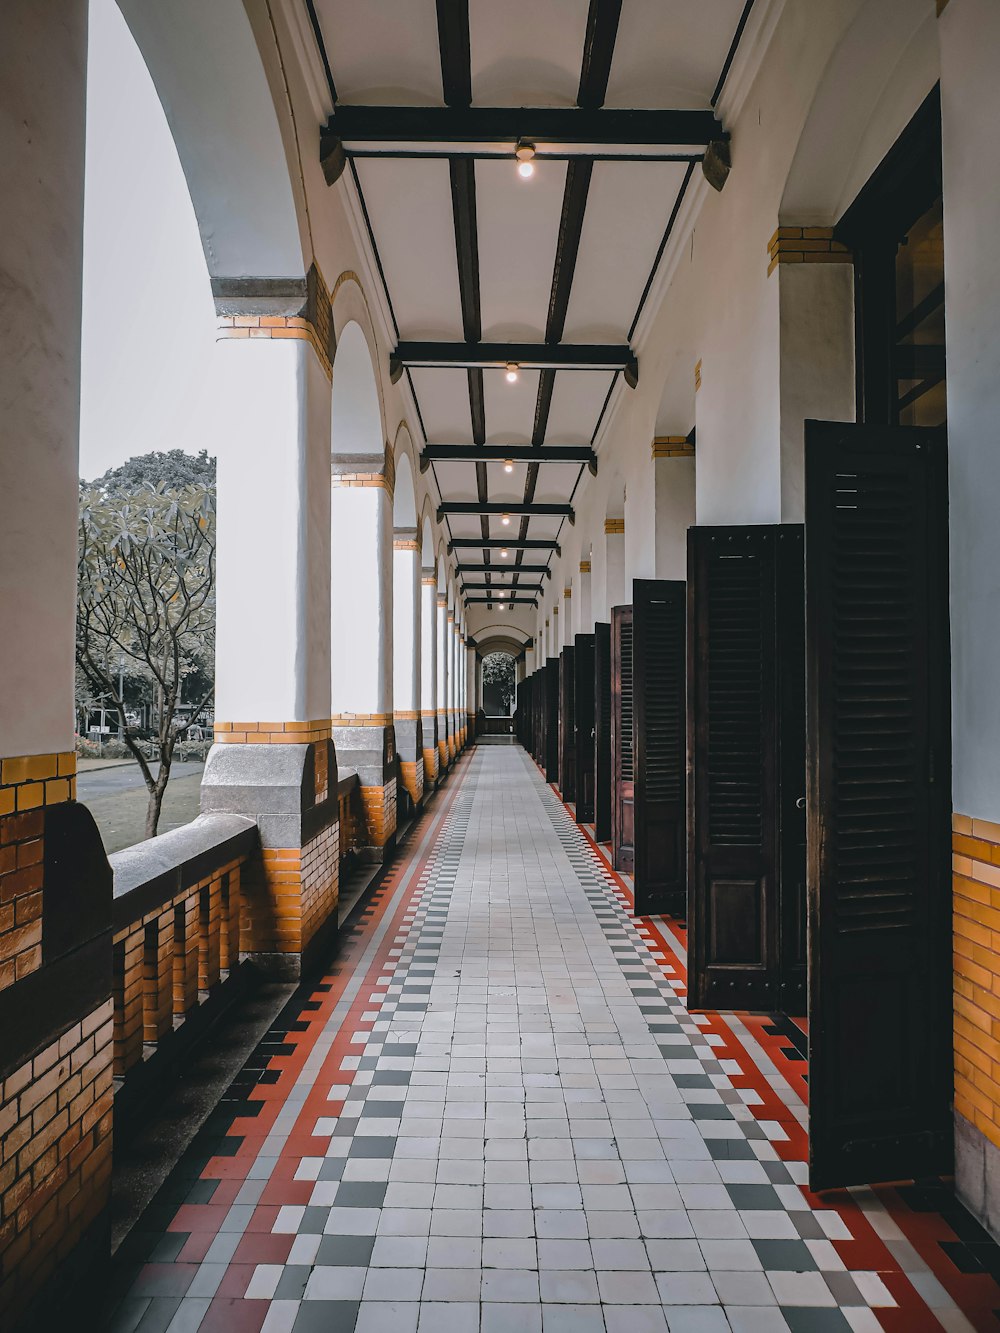 a long hallway with tiled floors and walls